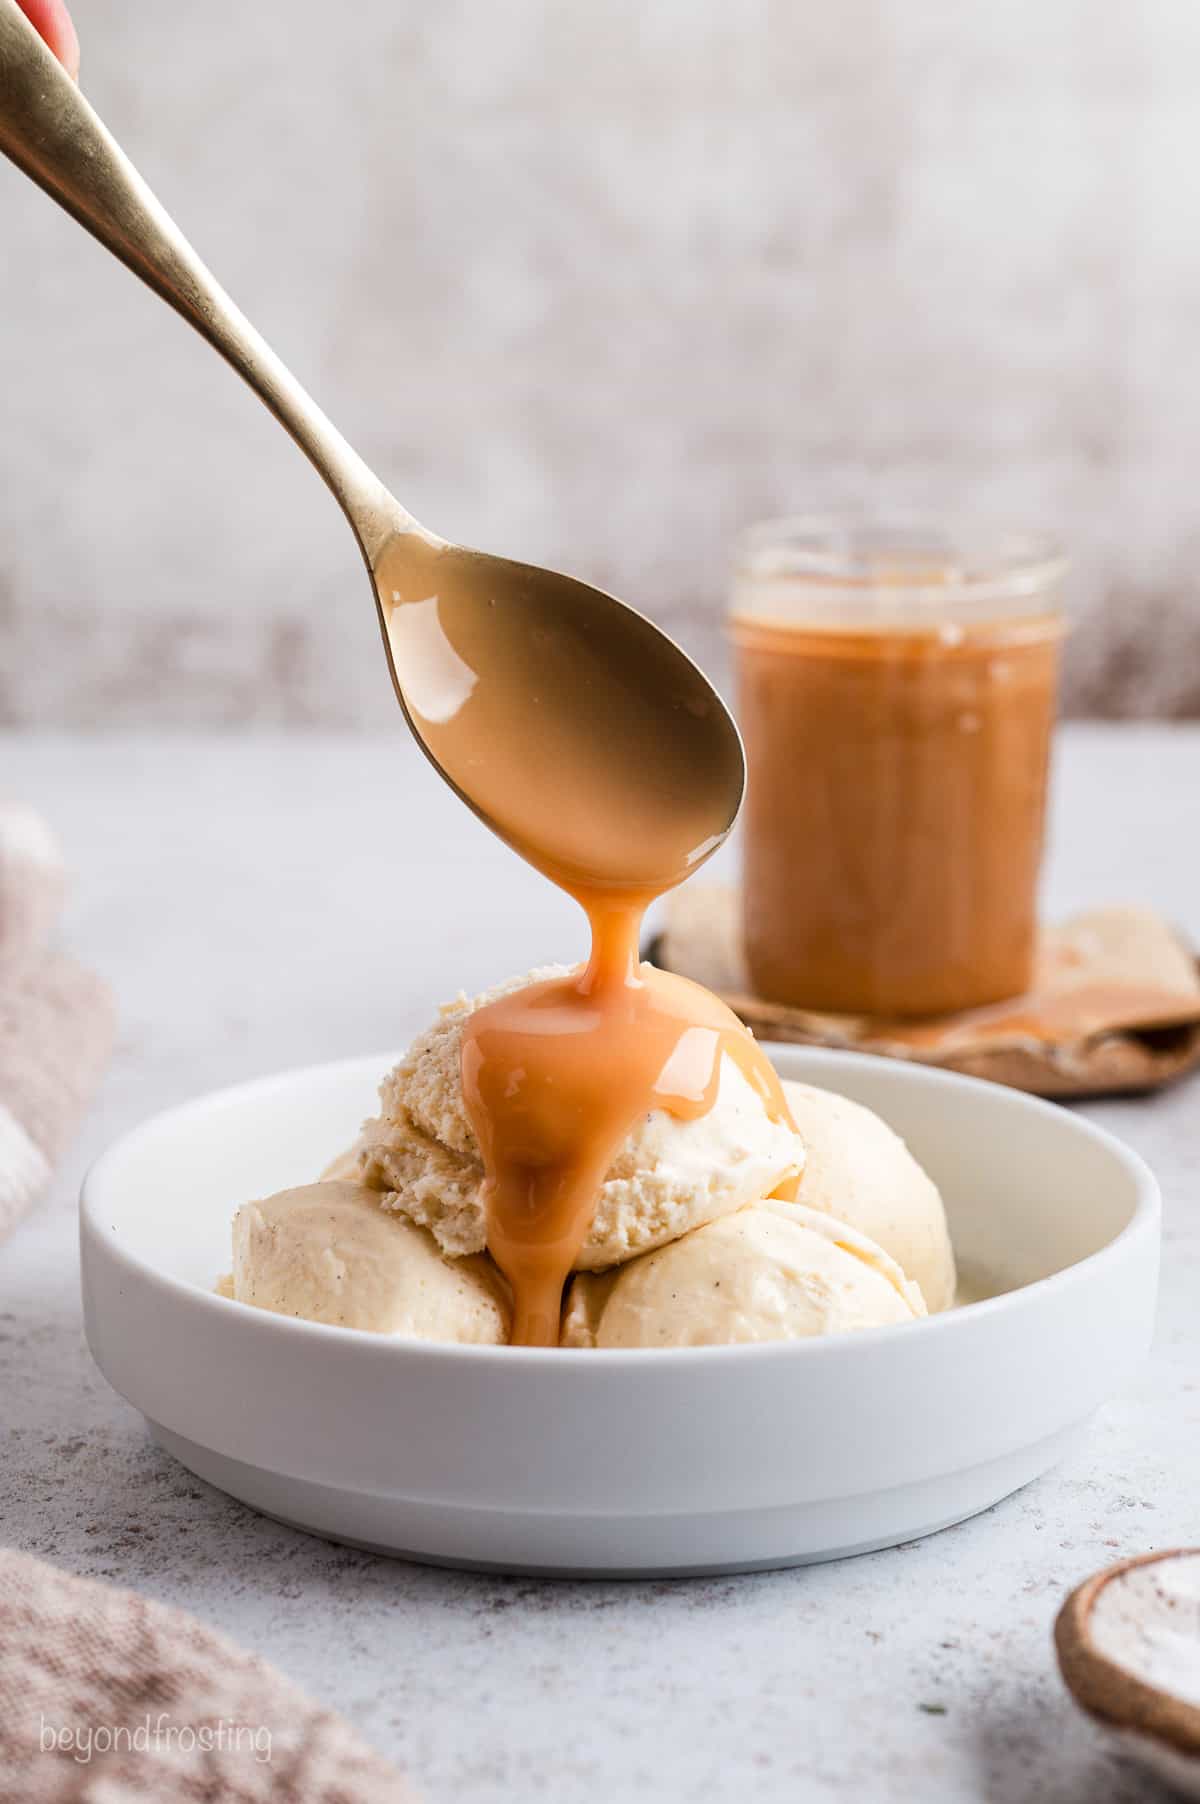 A spoon drizzling salted caramel sauce over a bowl of ice cream.